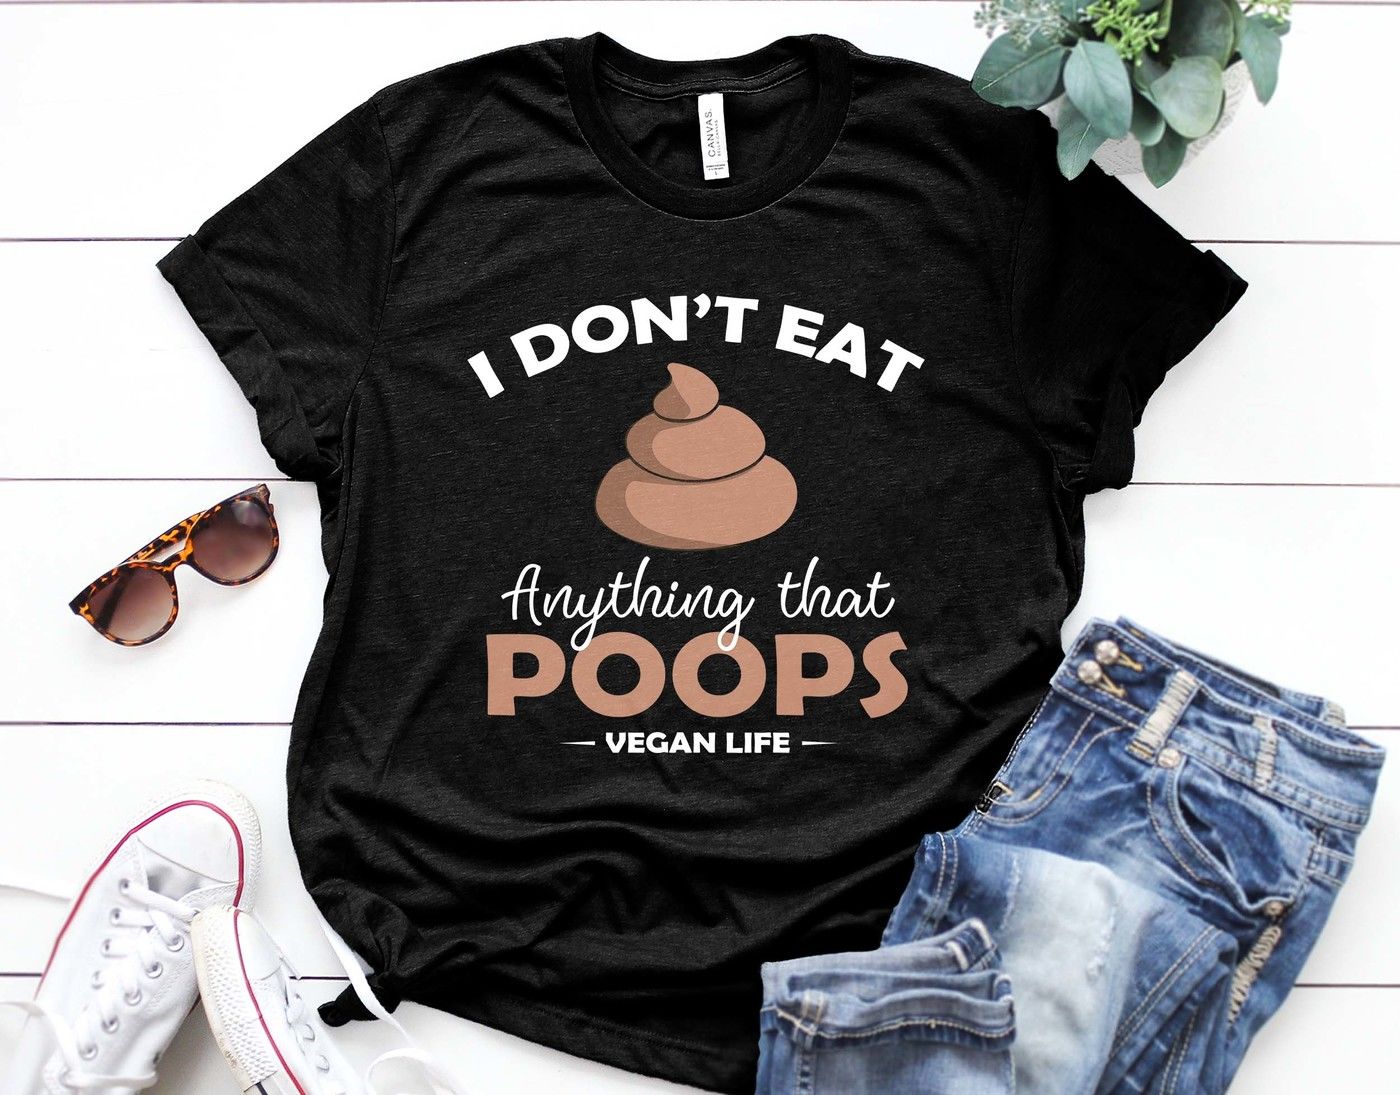 I don't eat anything that poops vegan life Printable By spoonyprint ...